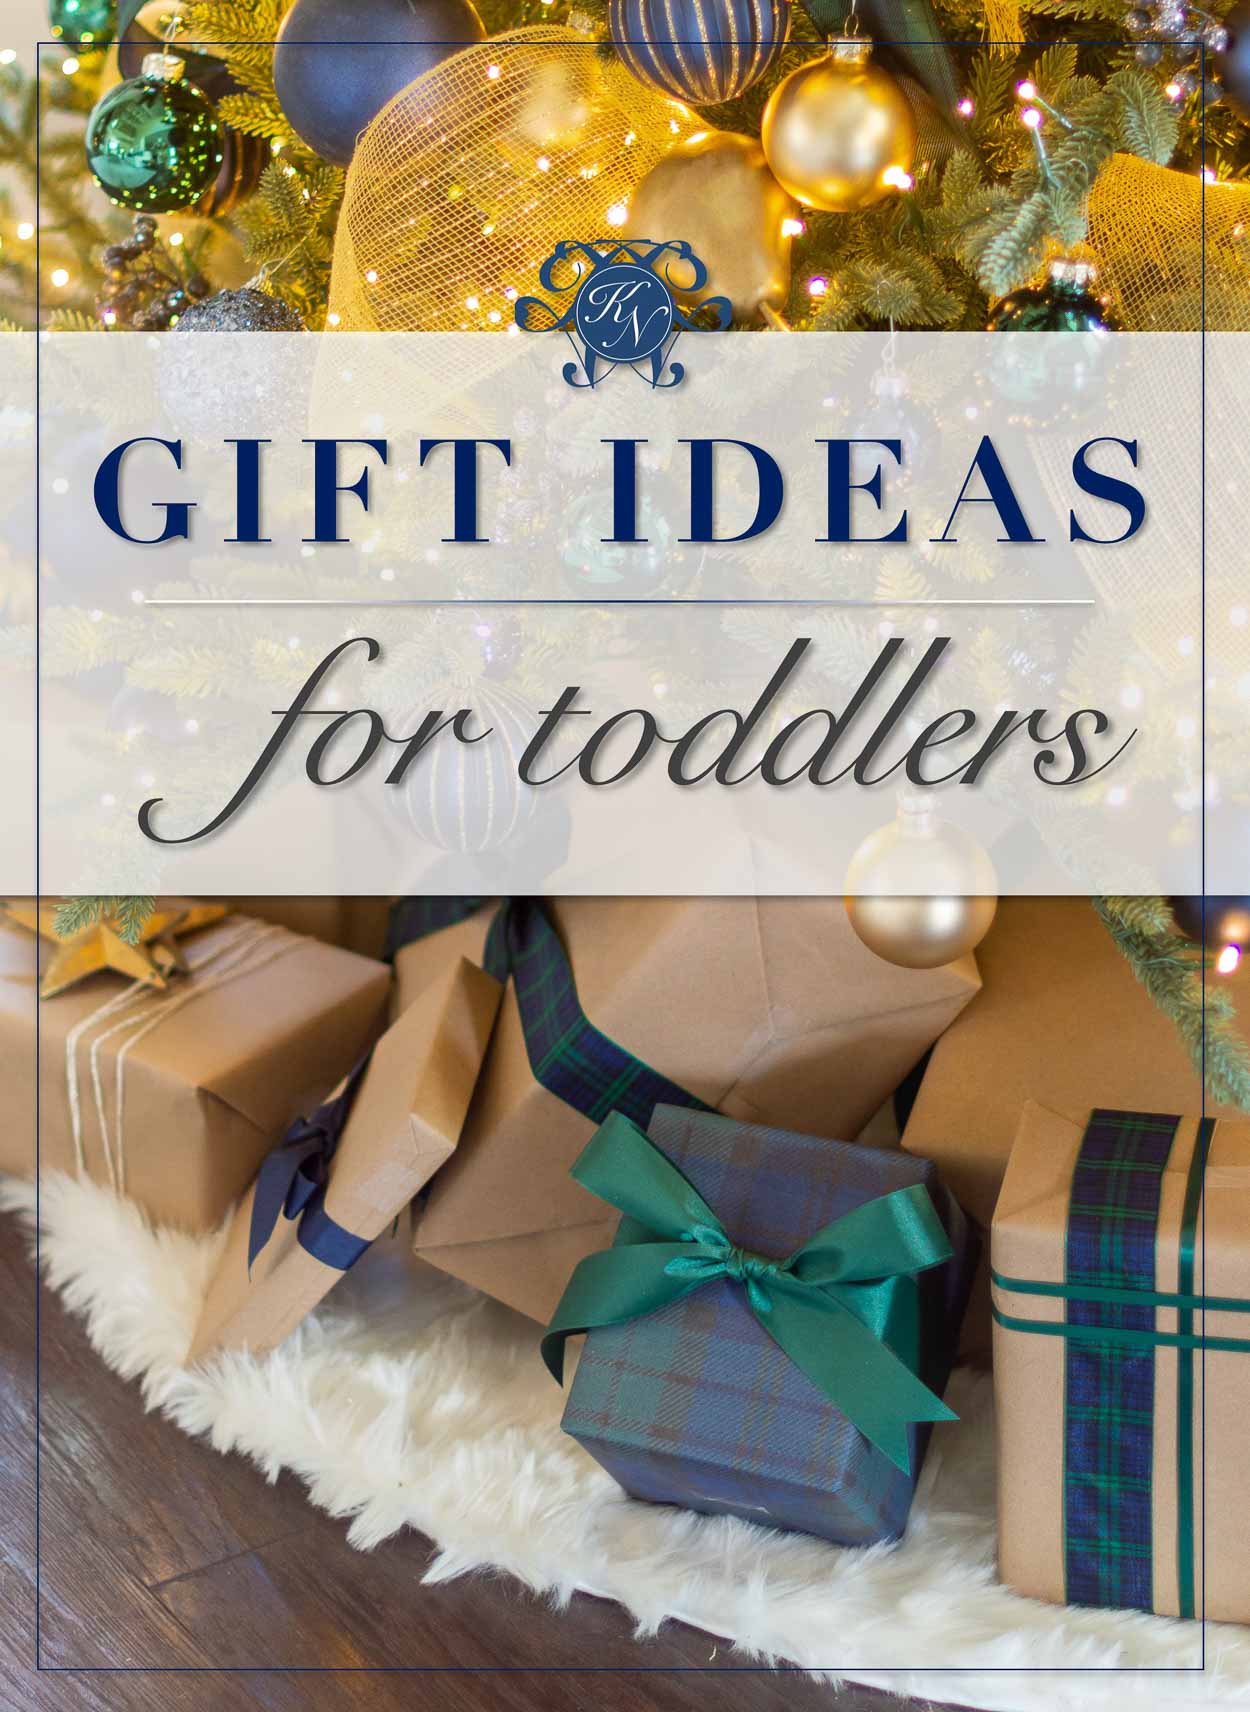 https://kelleynan.com/wp-content/uploads/2020/11/Feature-Gift-Guide-for-toddlers.jpg